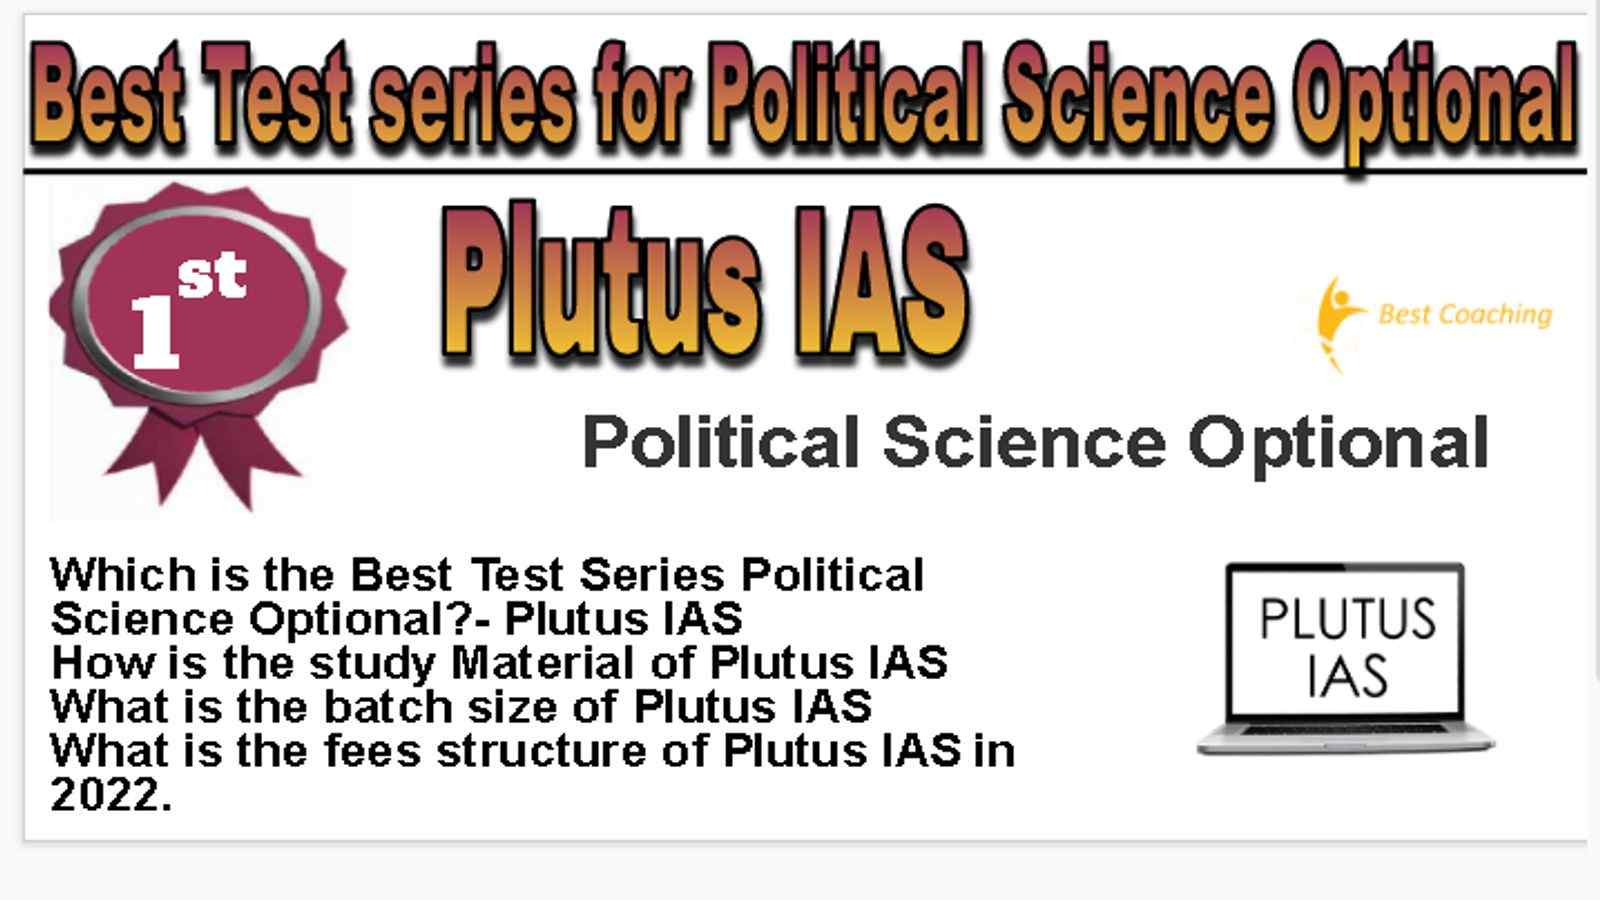 Rank 1 Best Test series for Political Science Optional